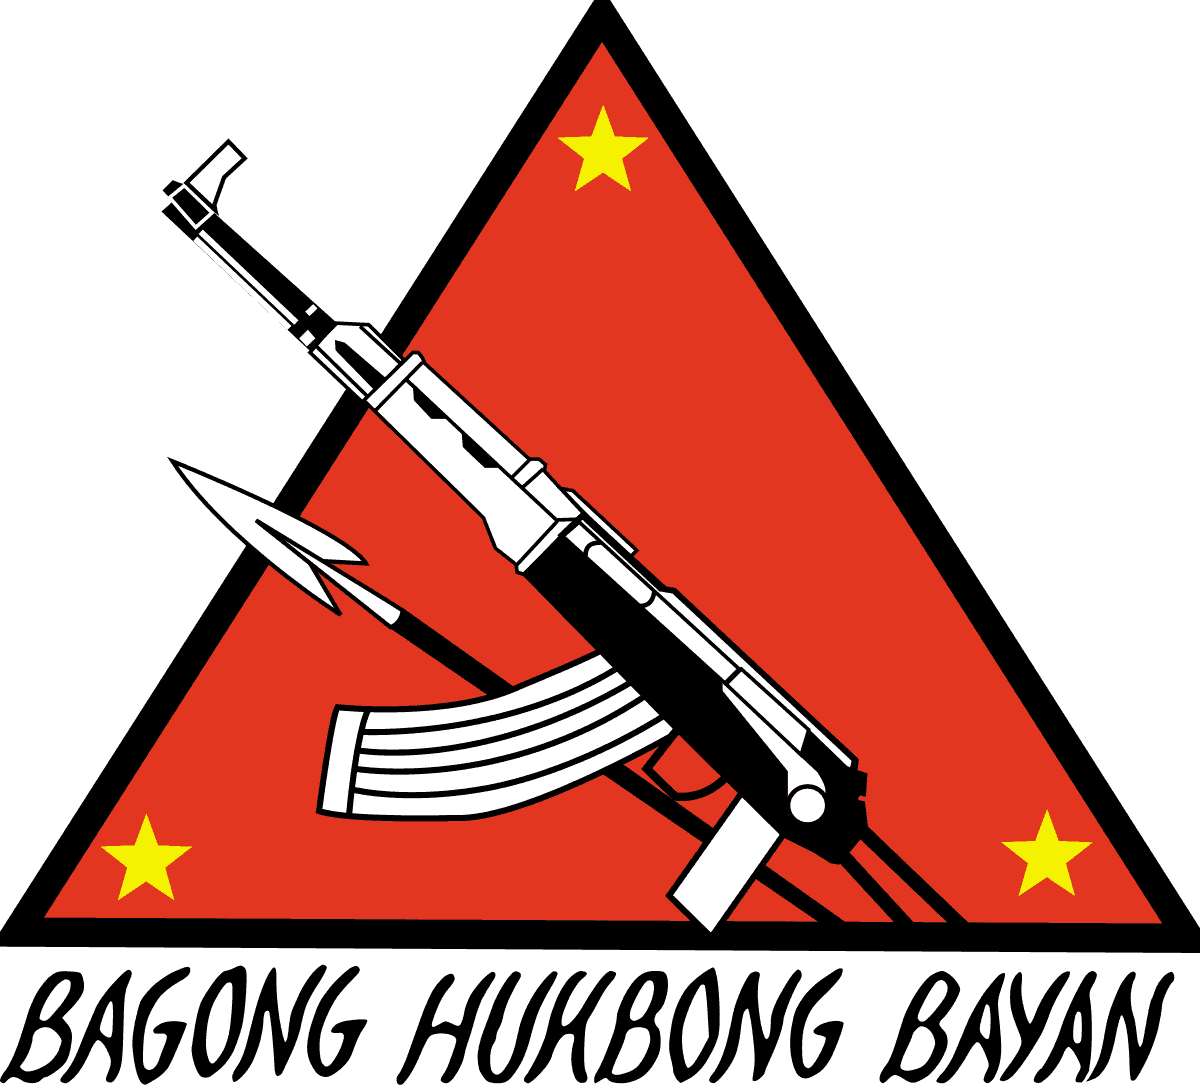 NPA rebels kill 3 persons accused as military informants in Negros